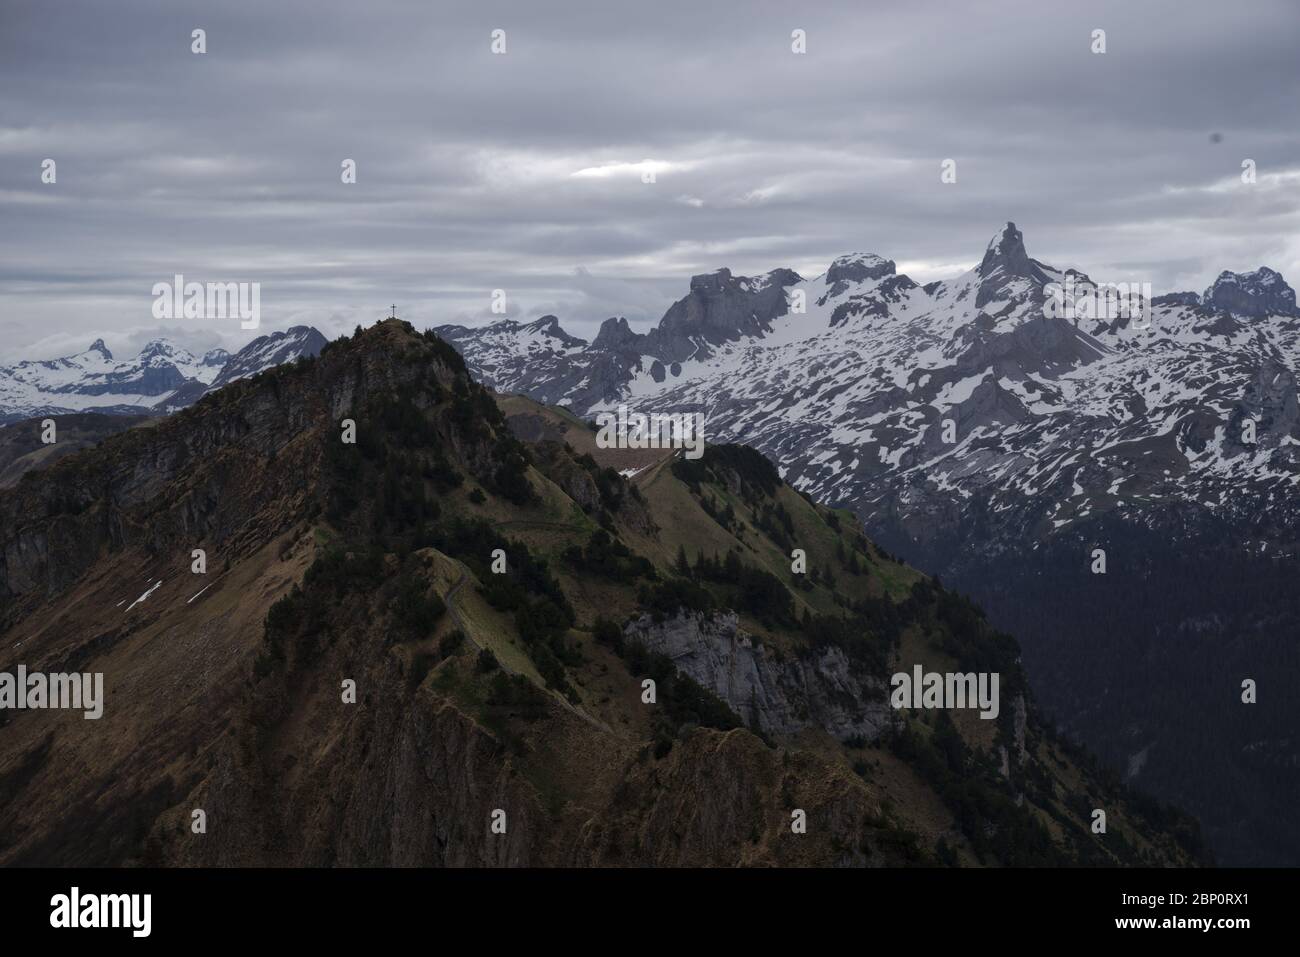 Panorama from Fronalpstock mountain peak overlooking Lake Lucerne and a typical swiss landscape with mountains and lakes. Stock Photo